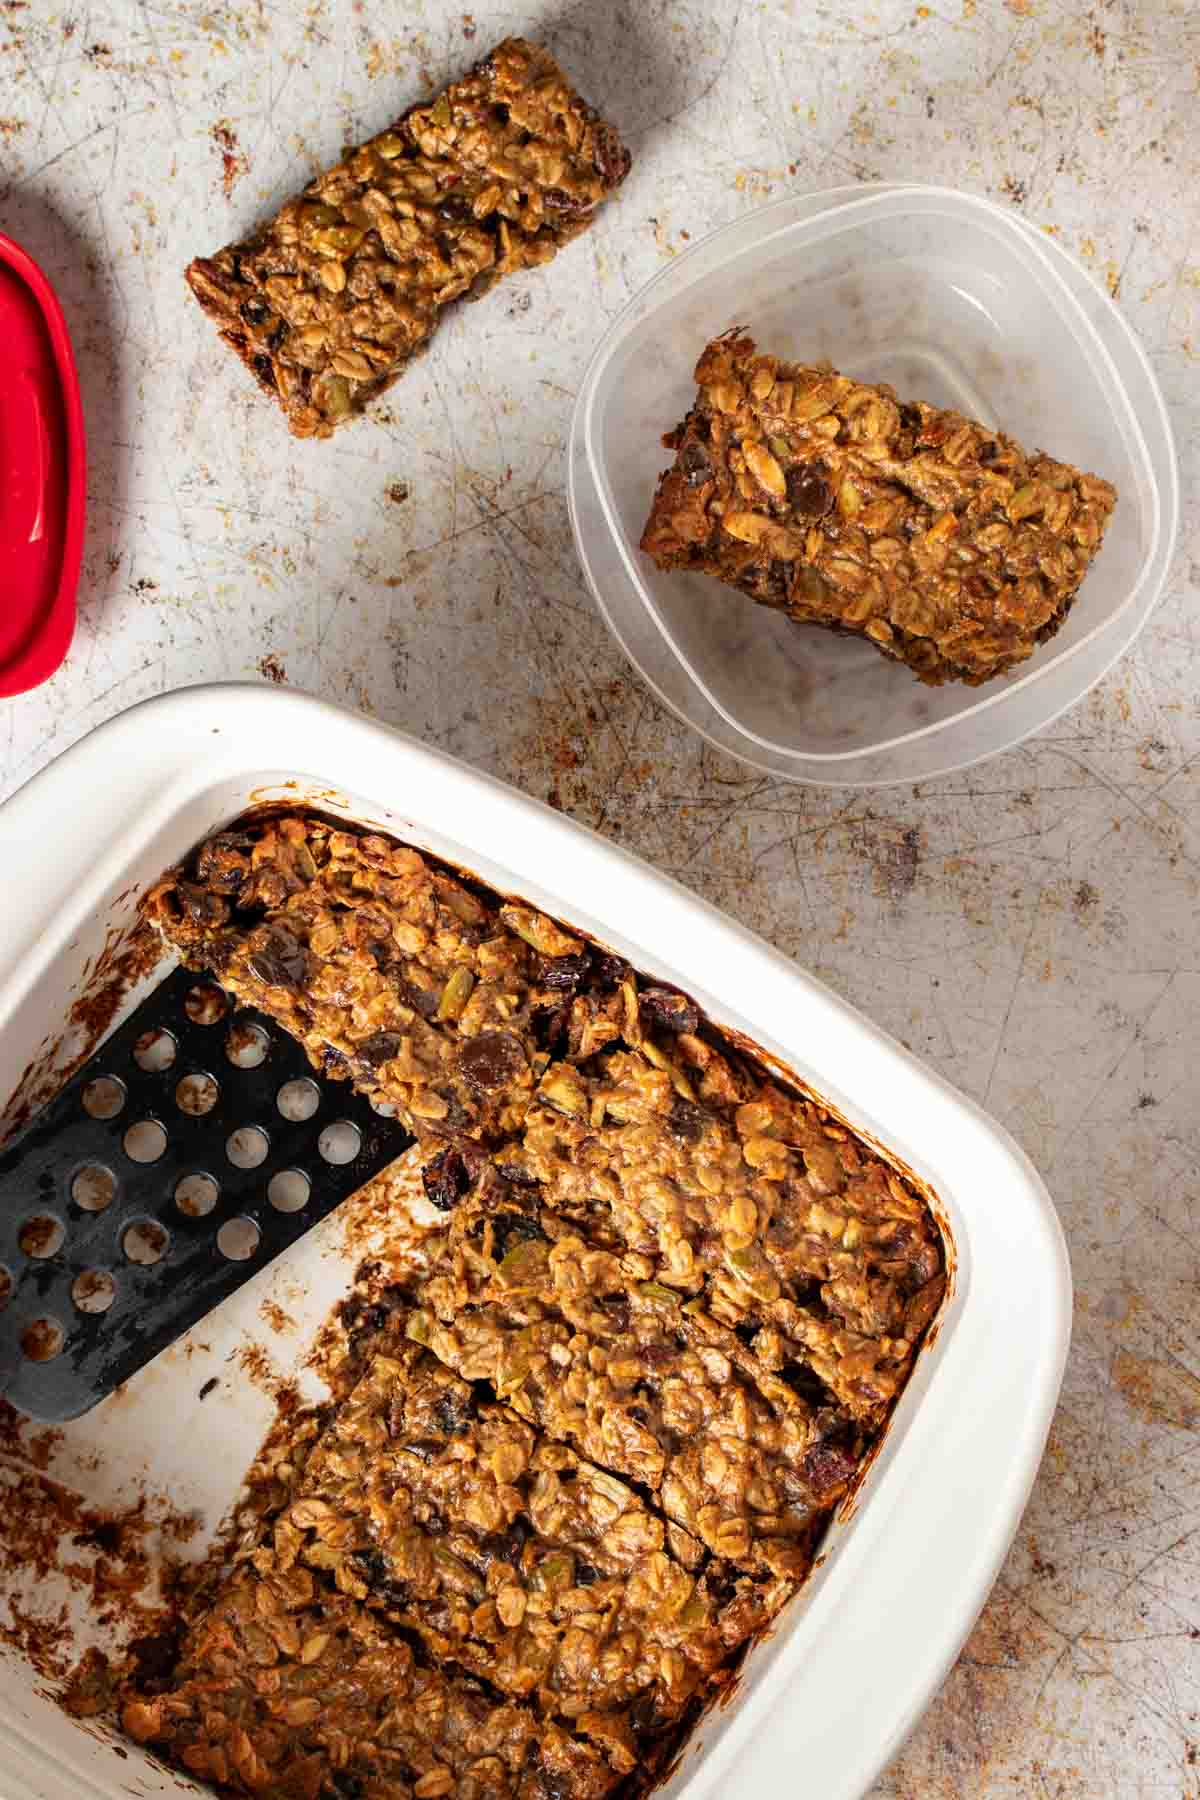 A black spatula putting baked breakfast bars into a plastic container with a red lid.